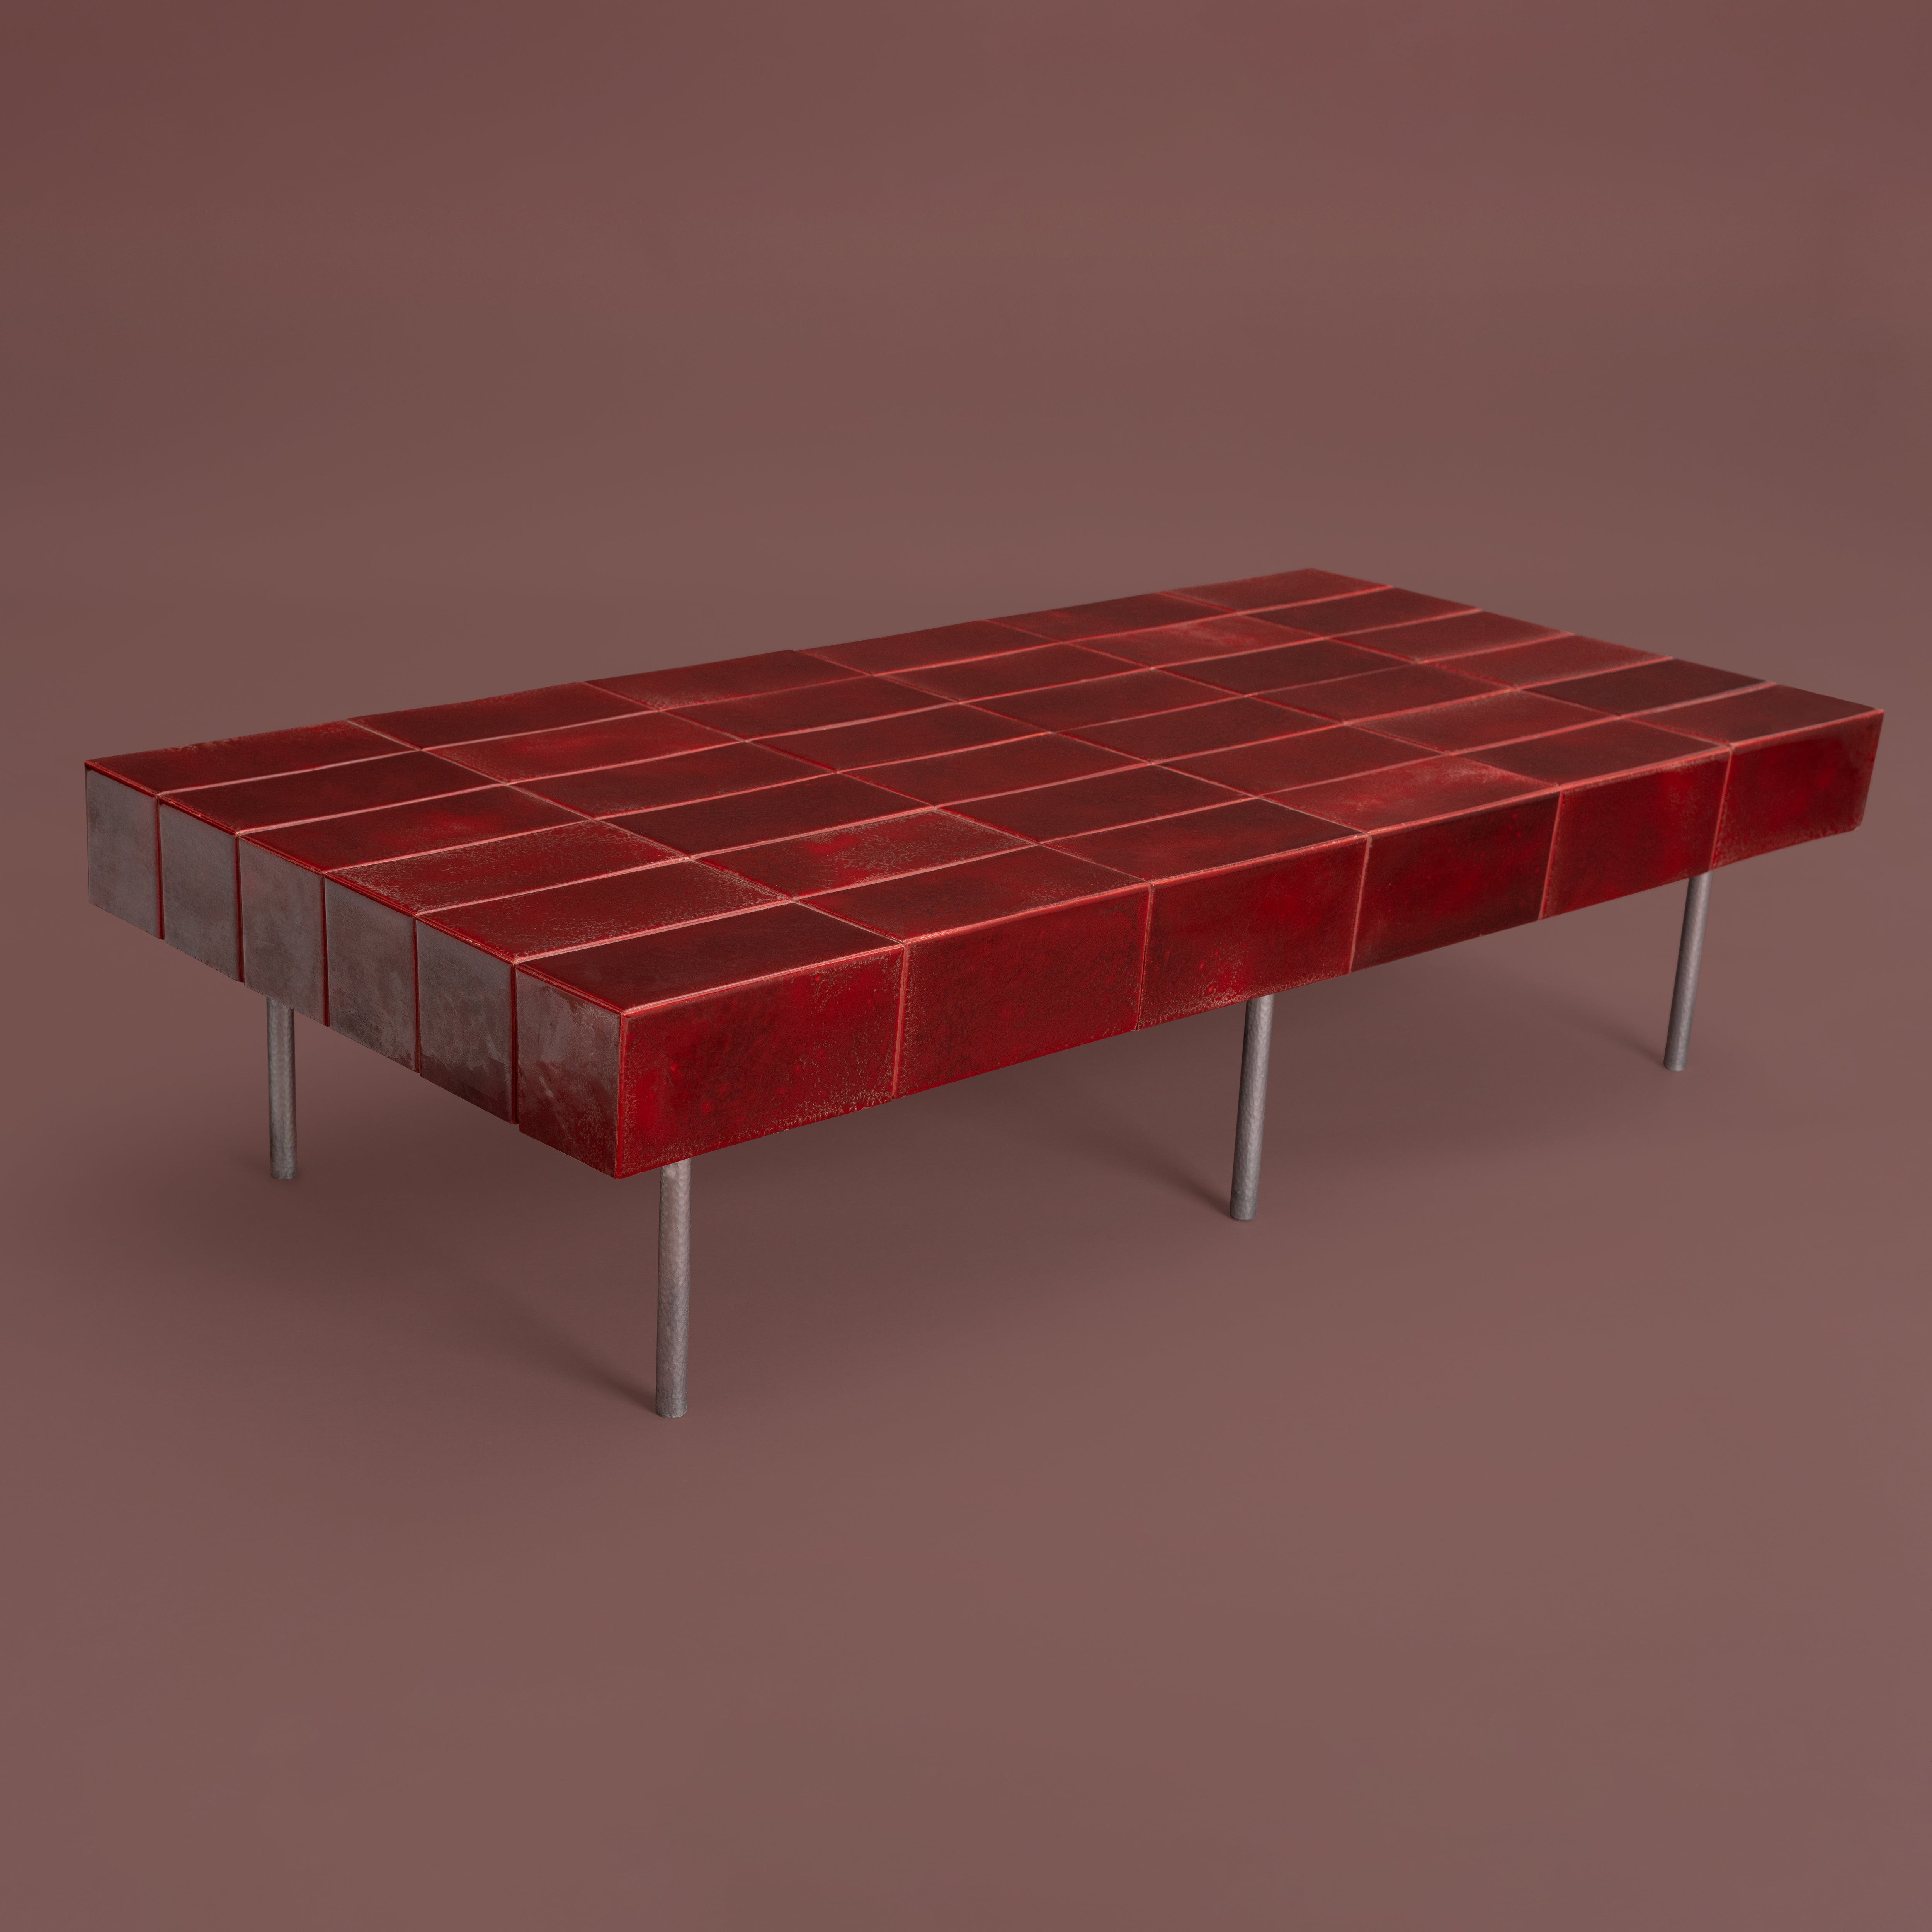 SCARLET TABLE